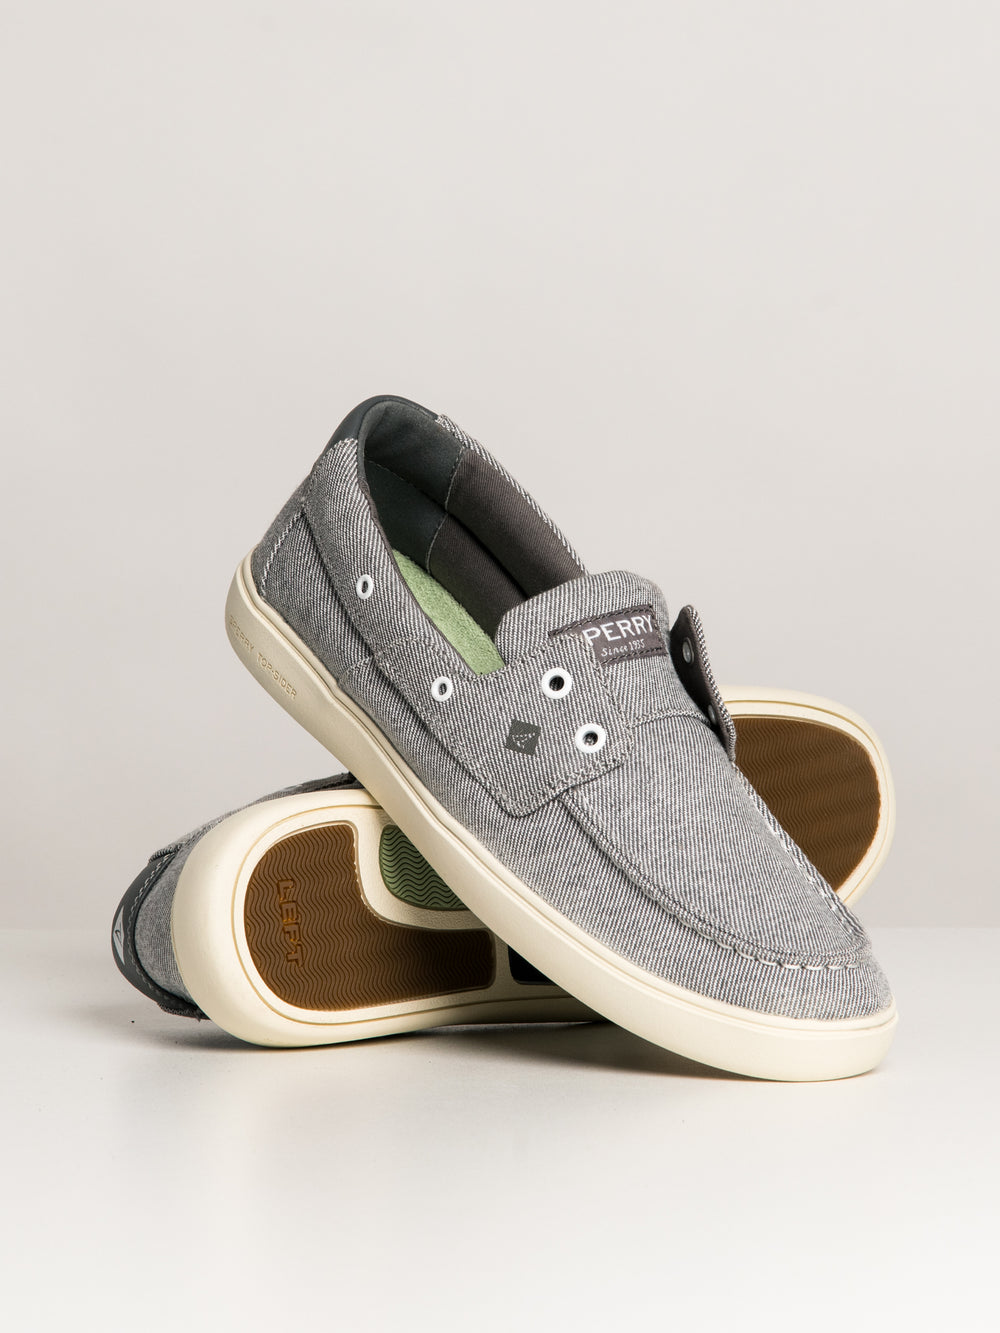 MENS SPERRY OUTER BANKS 2-EYE BOAT SHOE